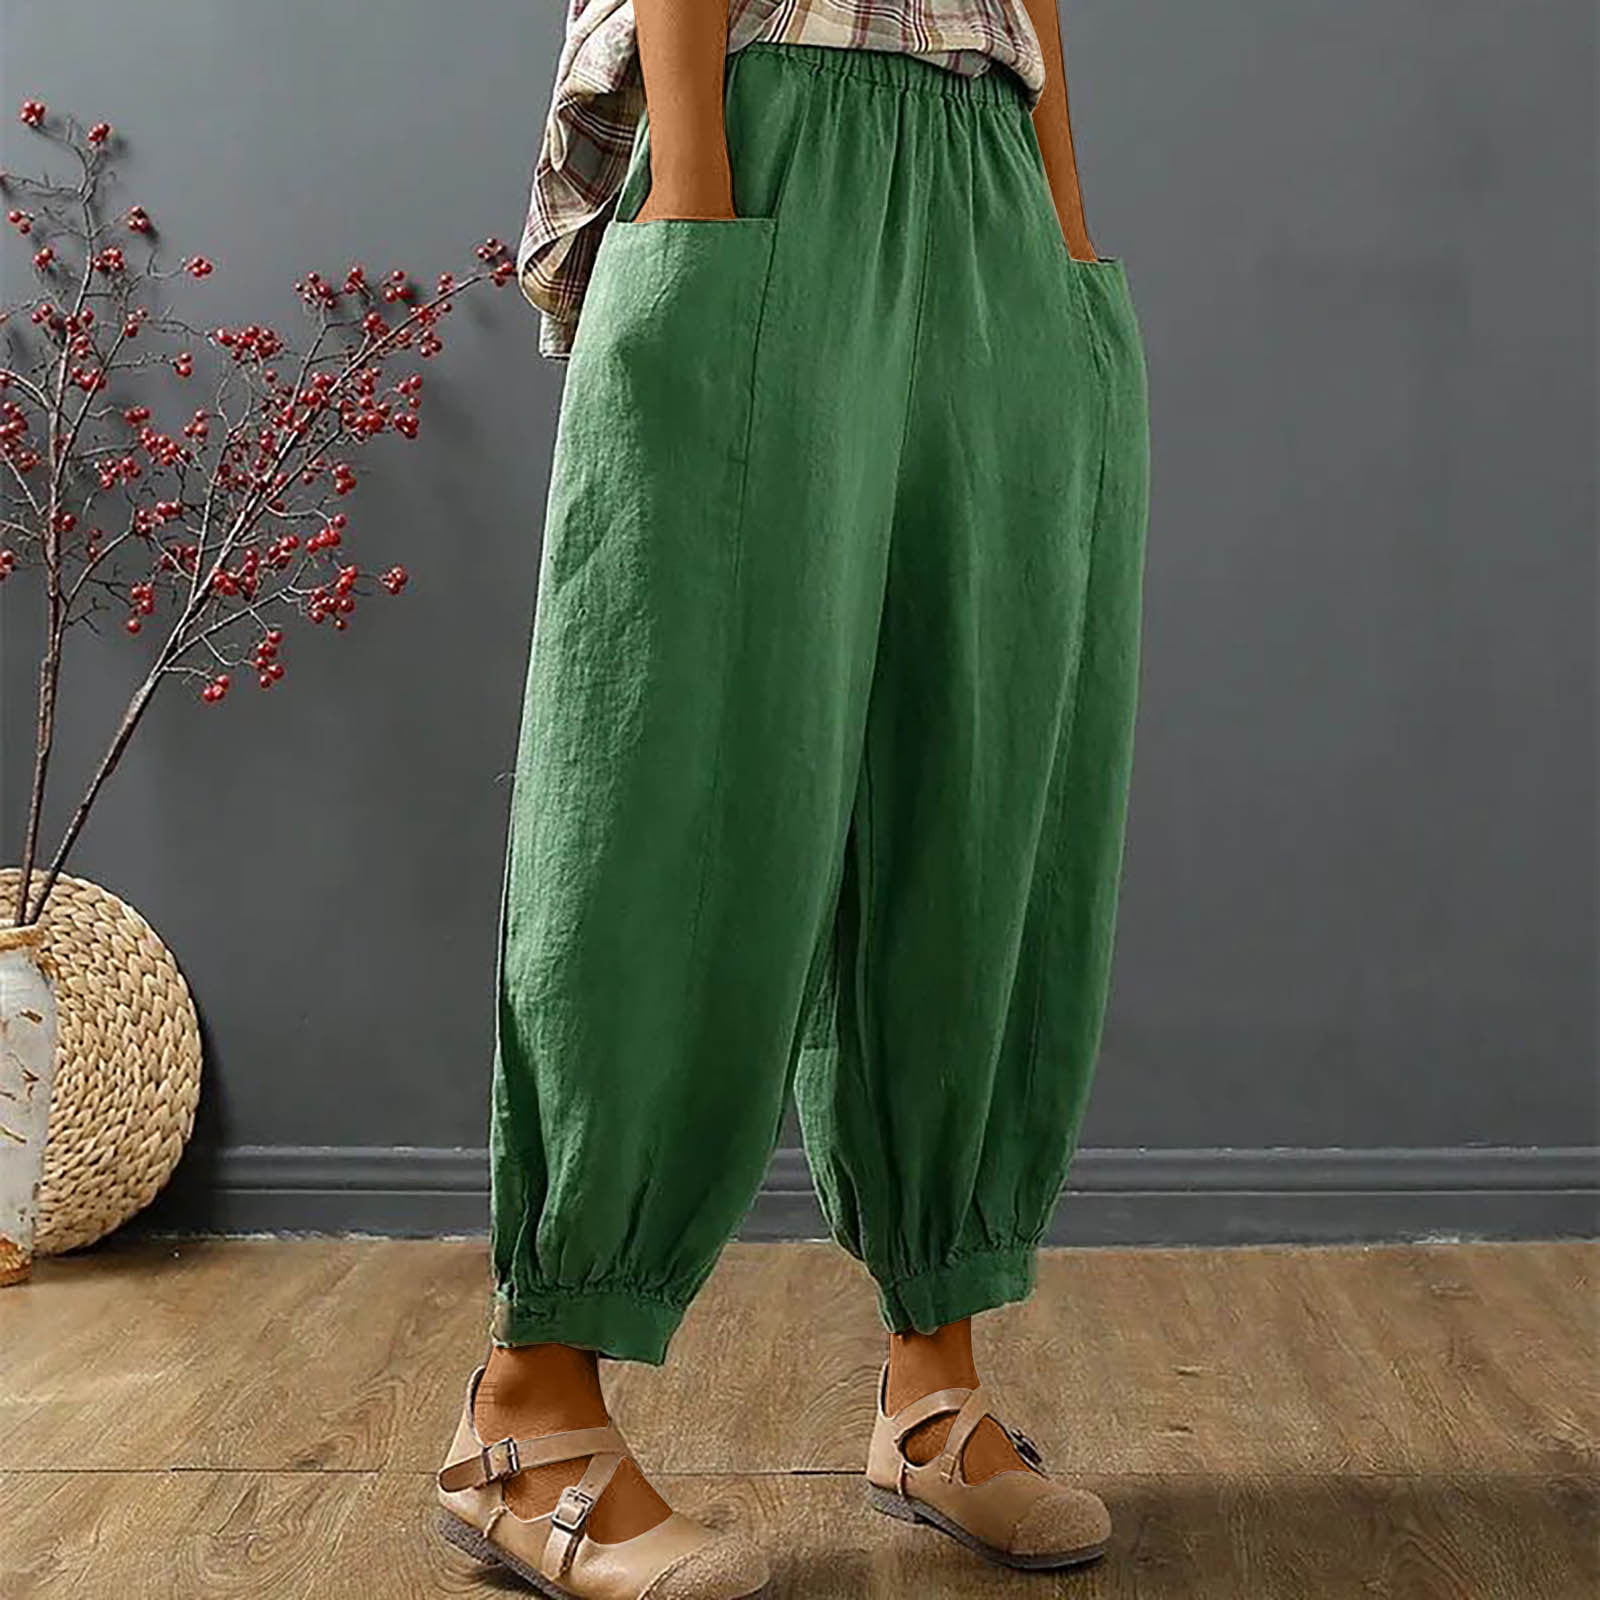 Linen Wide Leg Pants for Women Summer Casual Elastic Waisted Pants Loose  Baggy Cotton Comfy Cuffed Pants with Pockets (Medium, White 16) 